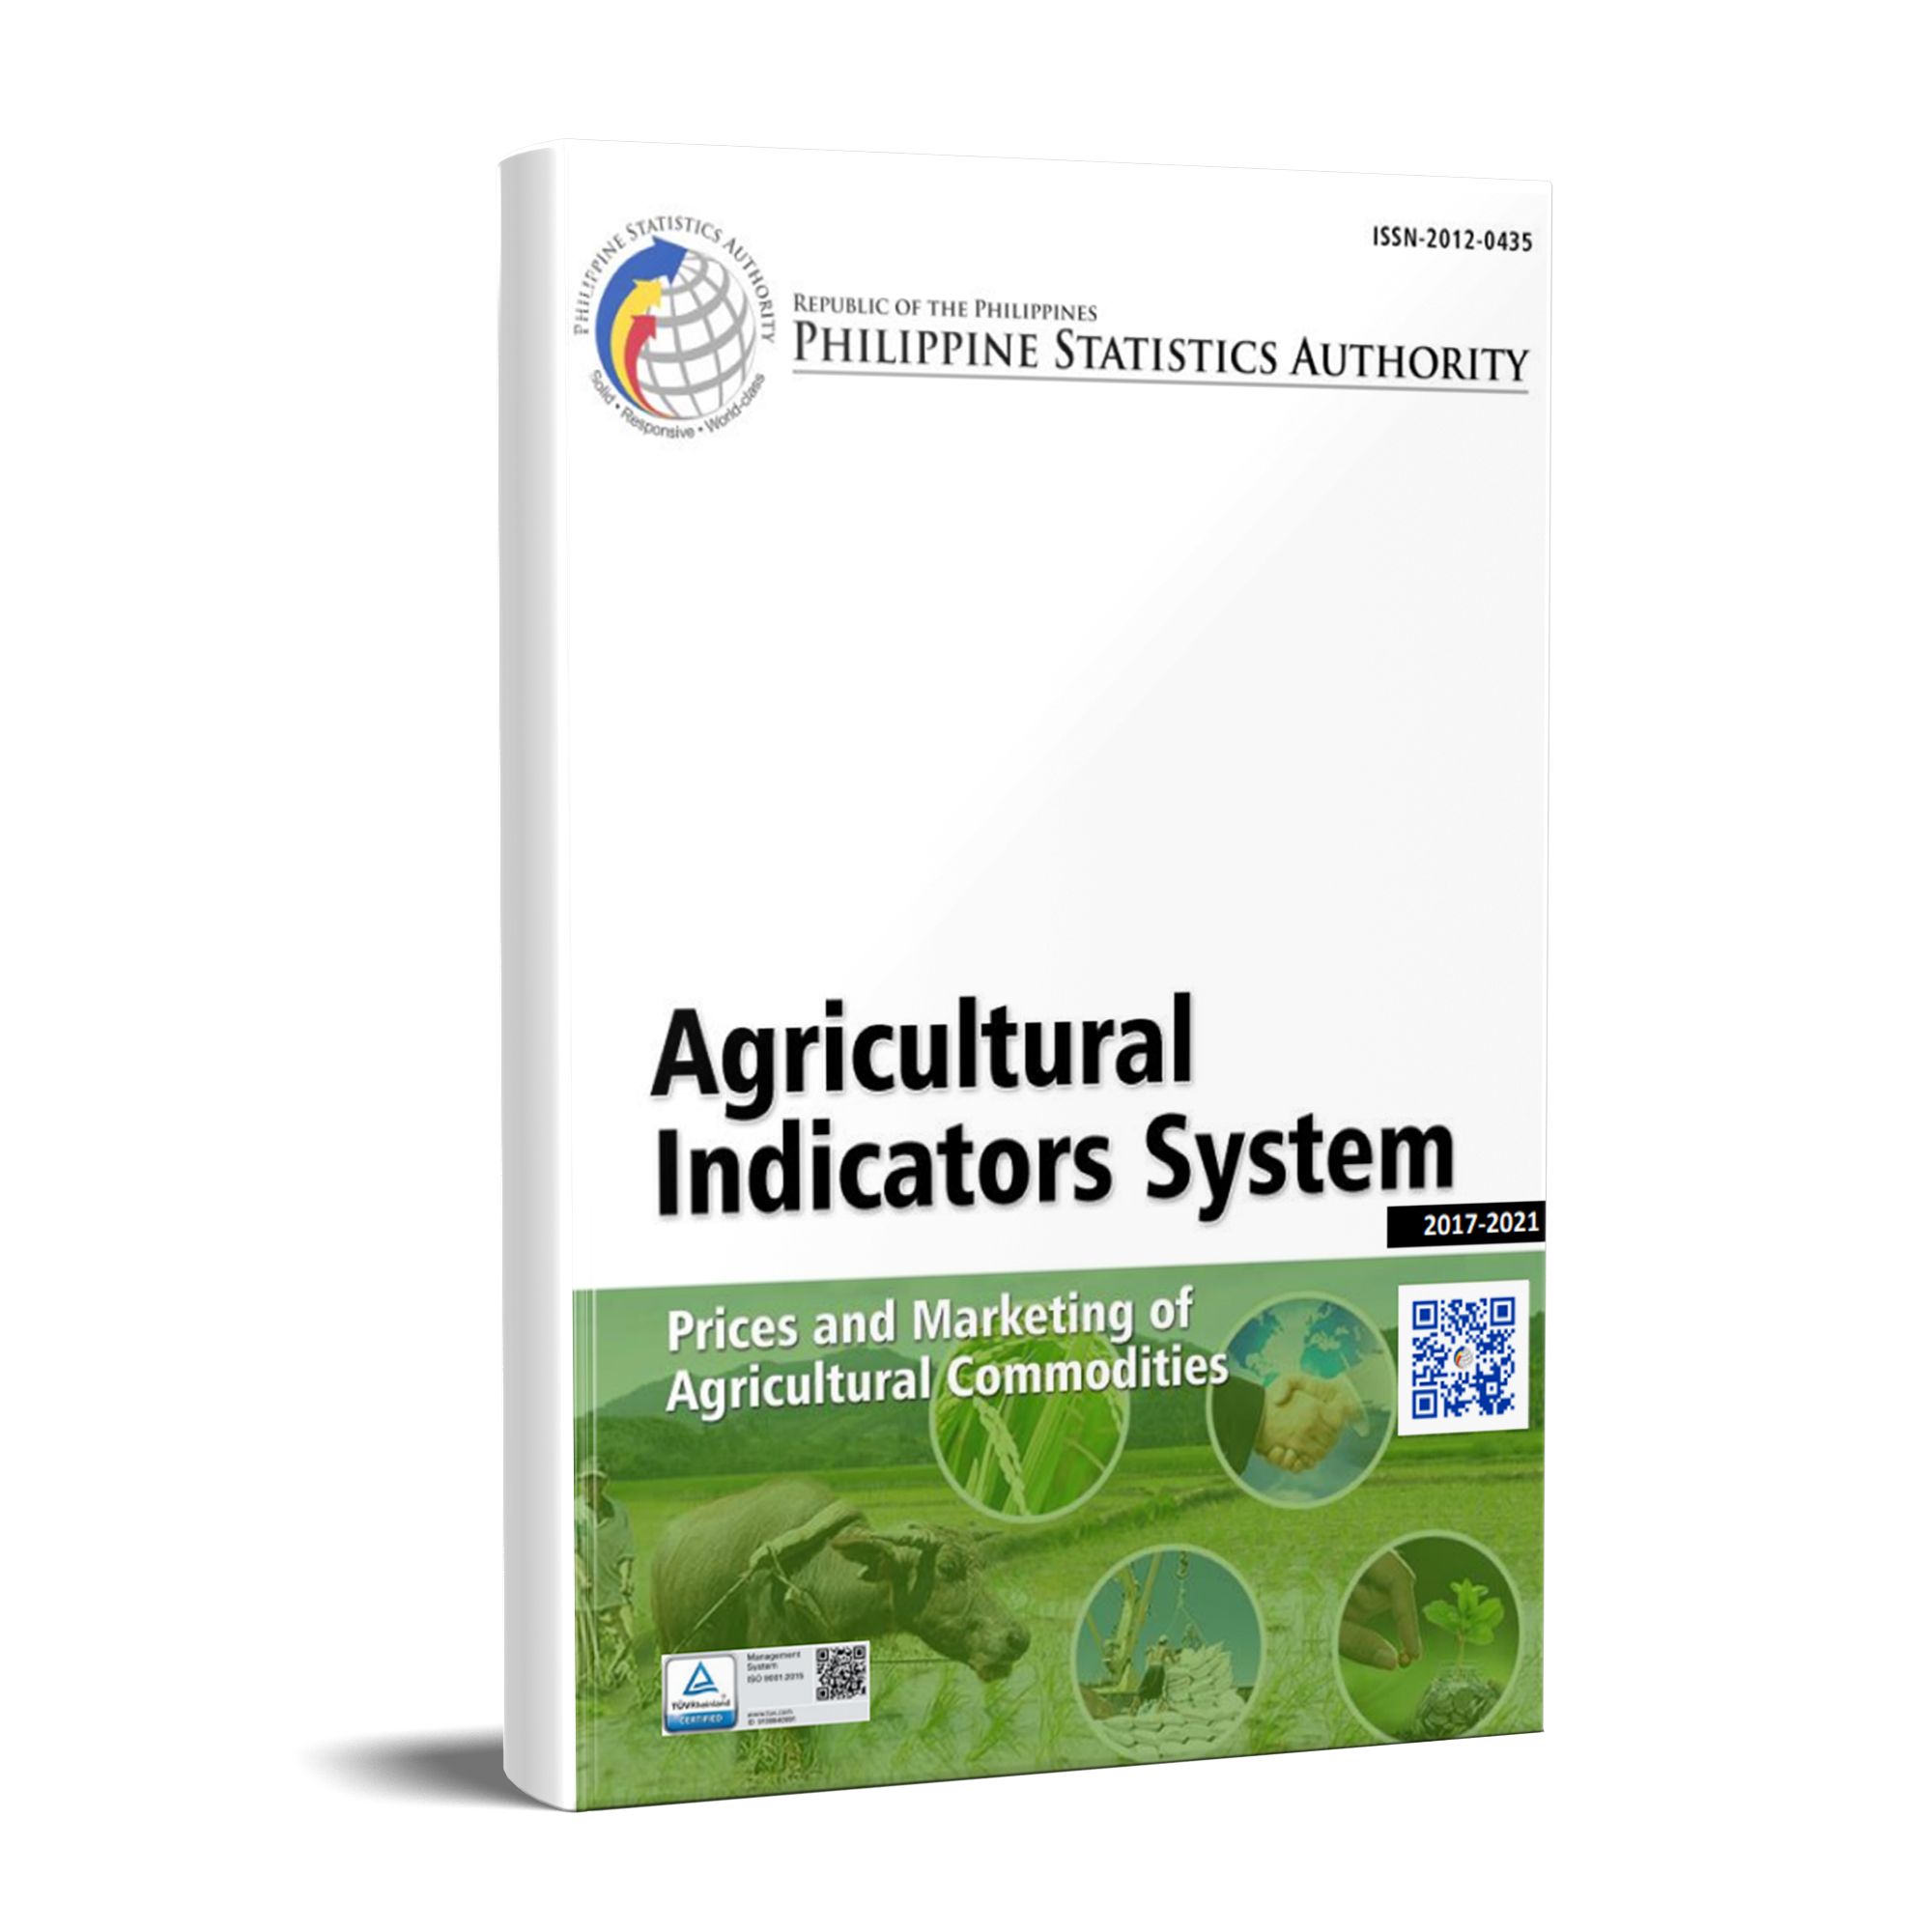 Agricultural Indicators System: Prices and Marketing of Agricultural Commodities